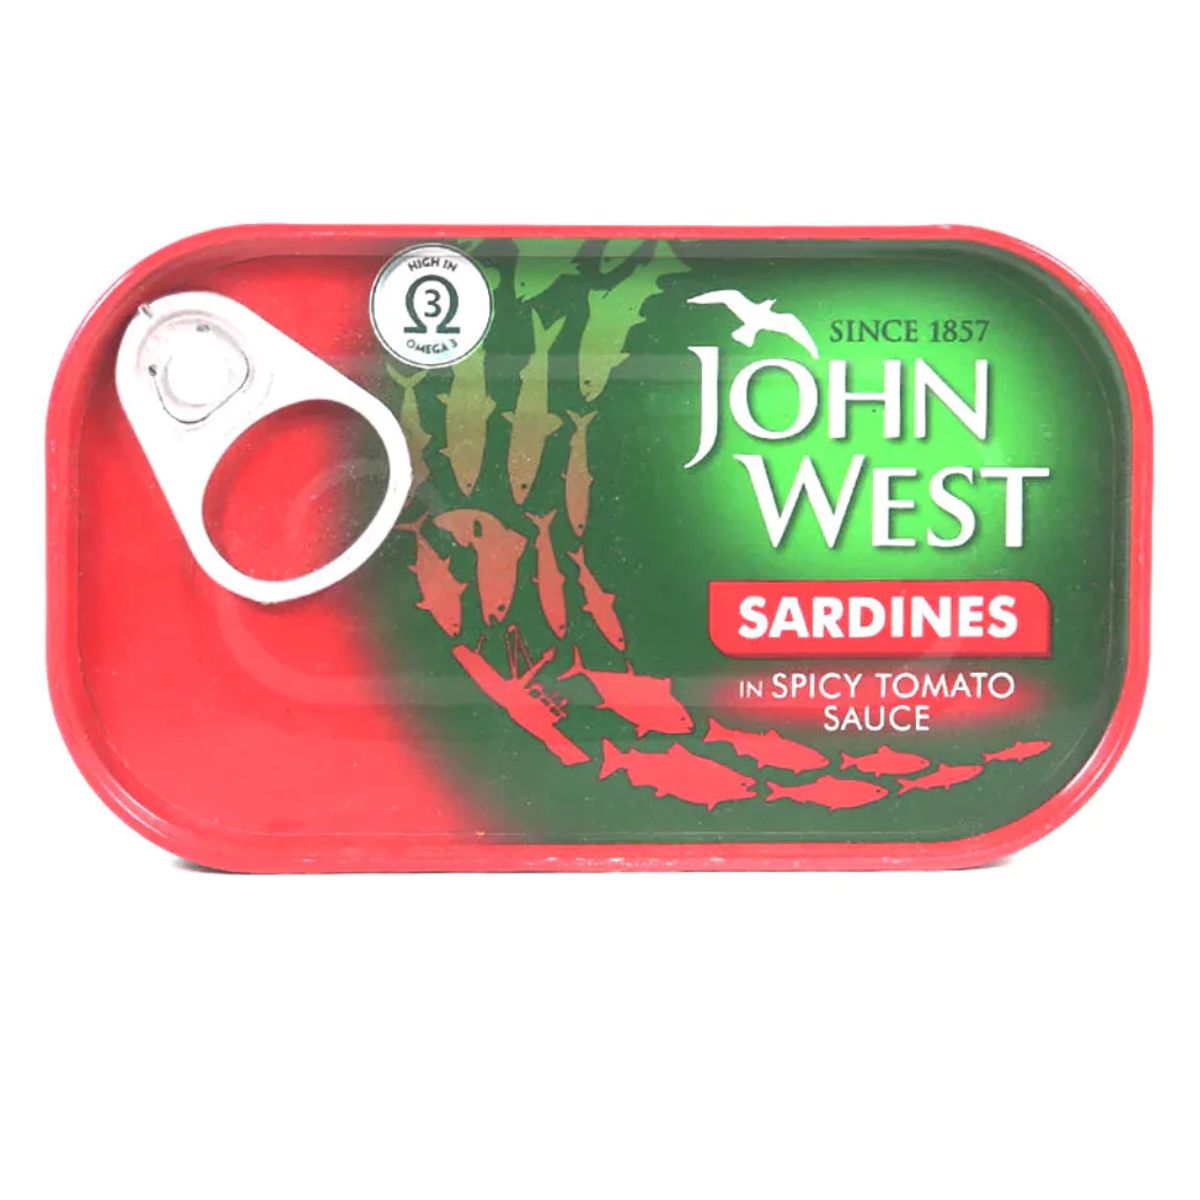 A can of John West - Sardines Spicy Tomato Sauce - 120g.